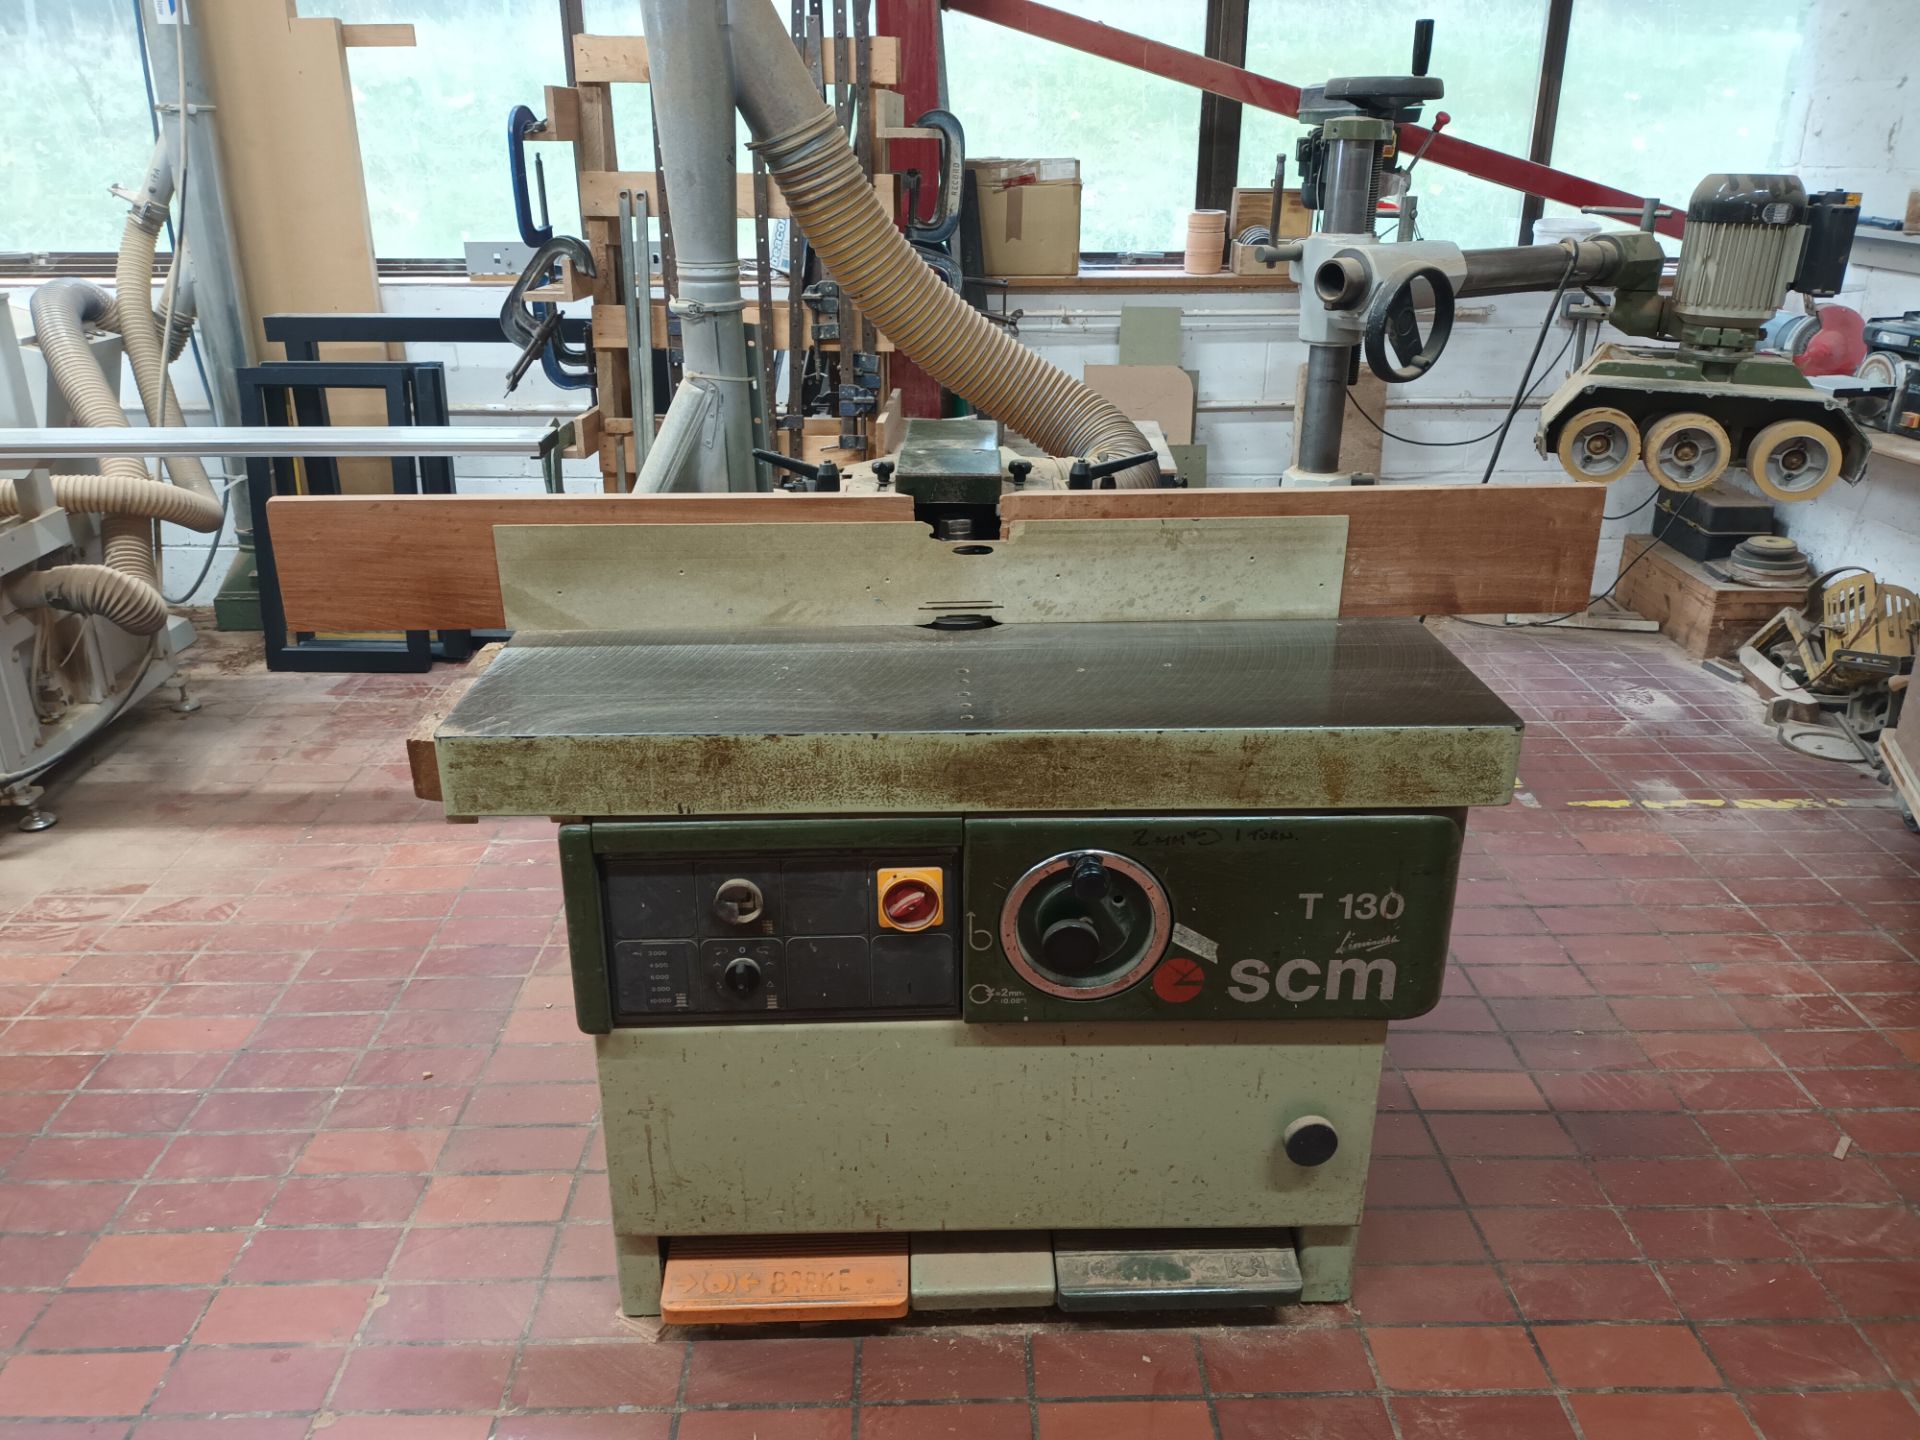 SCM T130 spindle moulder with comatic feed unit NB: this item has no CE marking. The Purchaser is